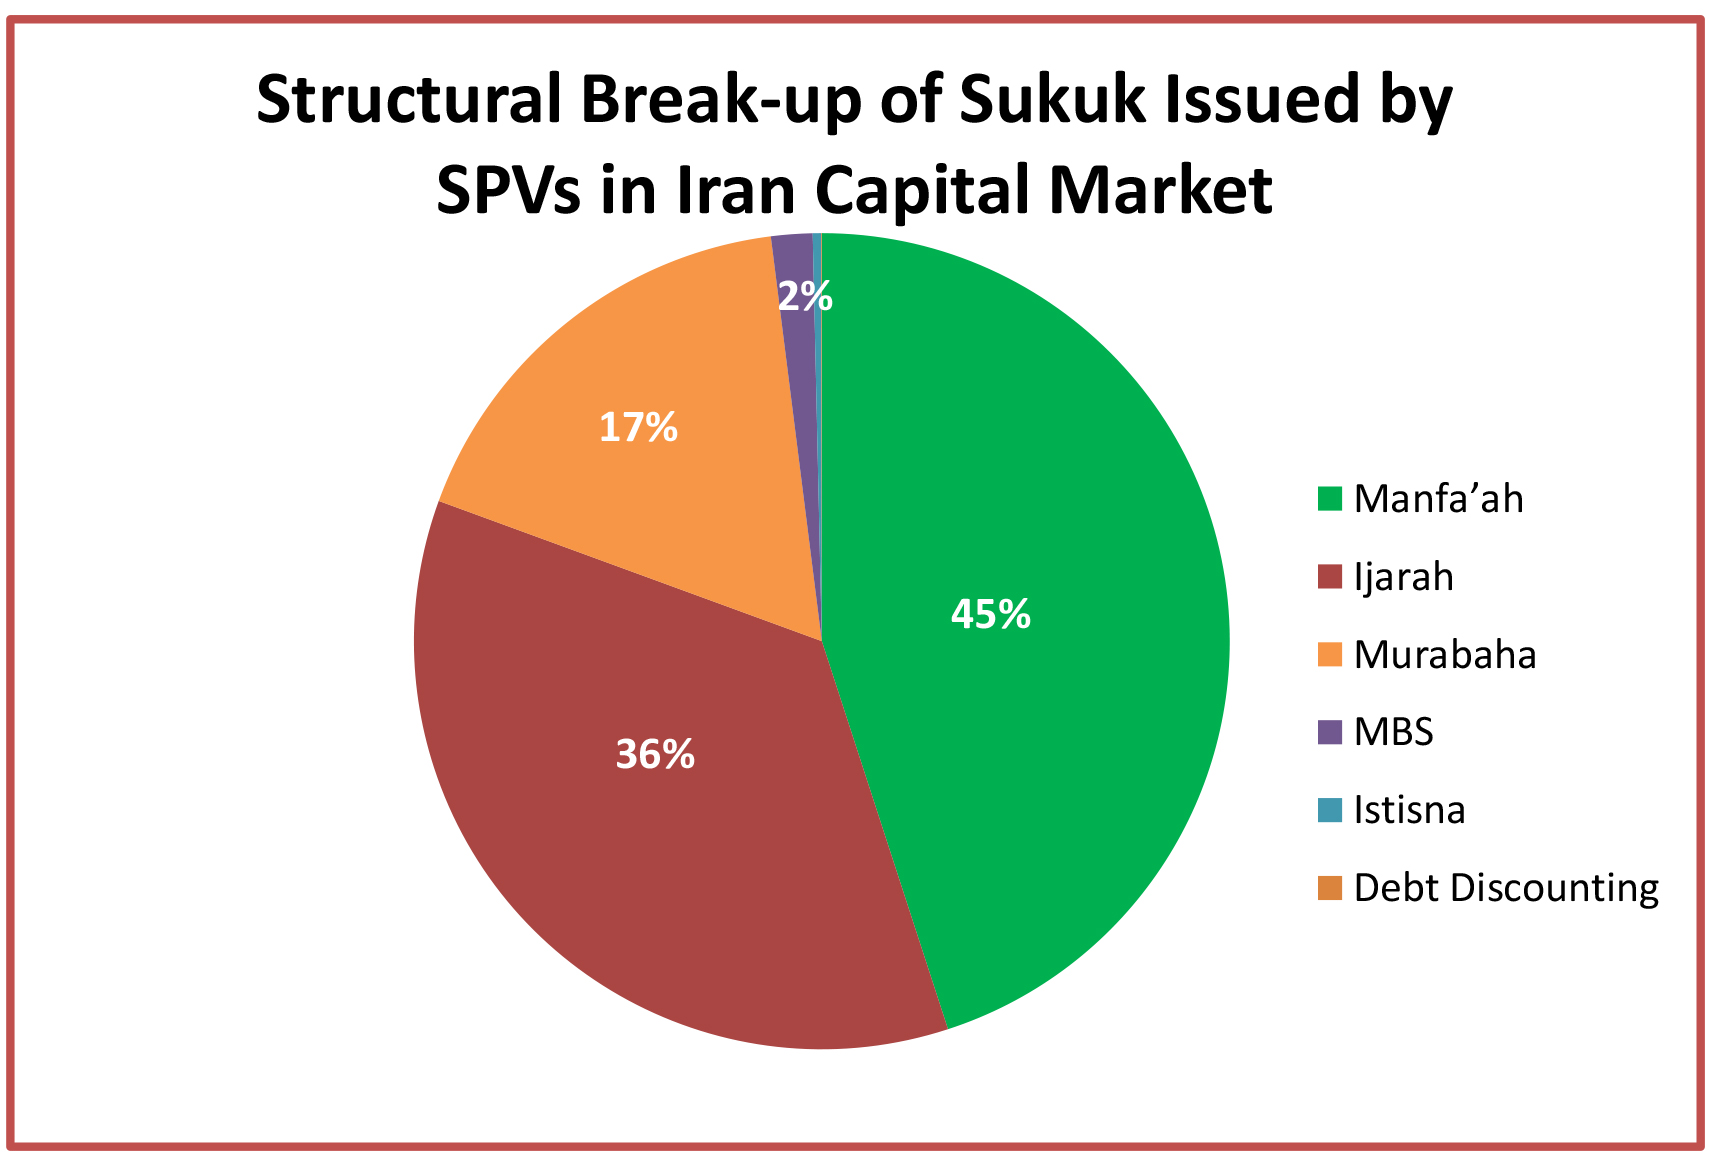 Structural Break-up of Sukuk Issued by SPVs in Iran Capital Market